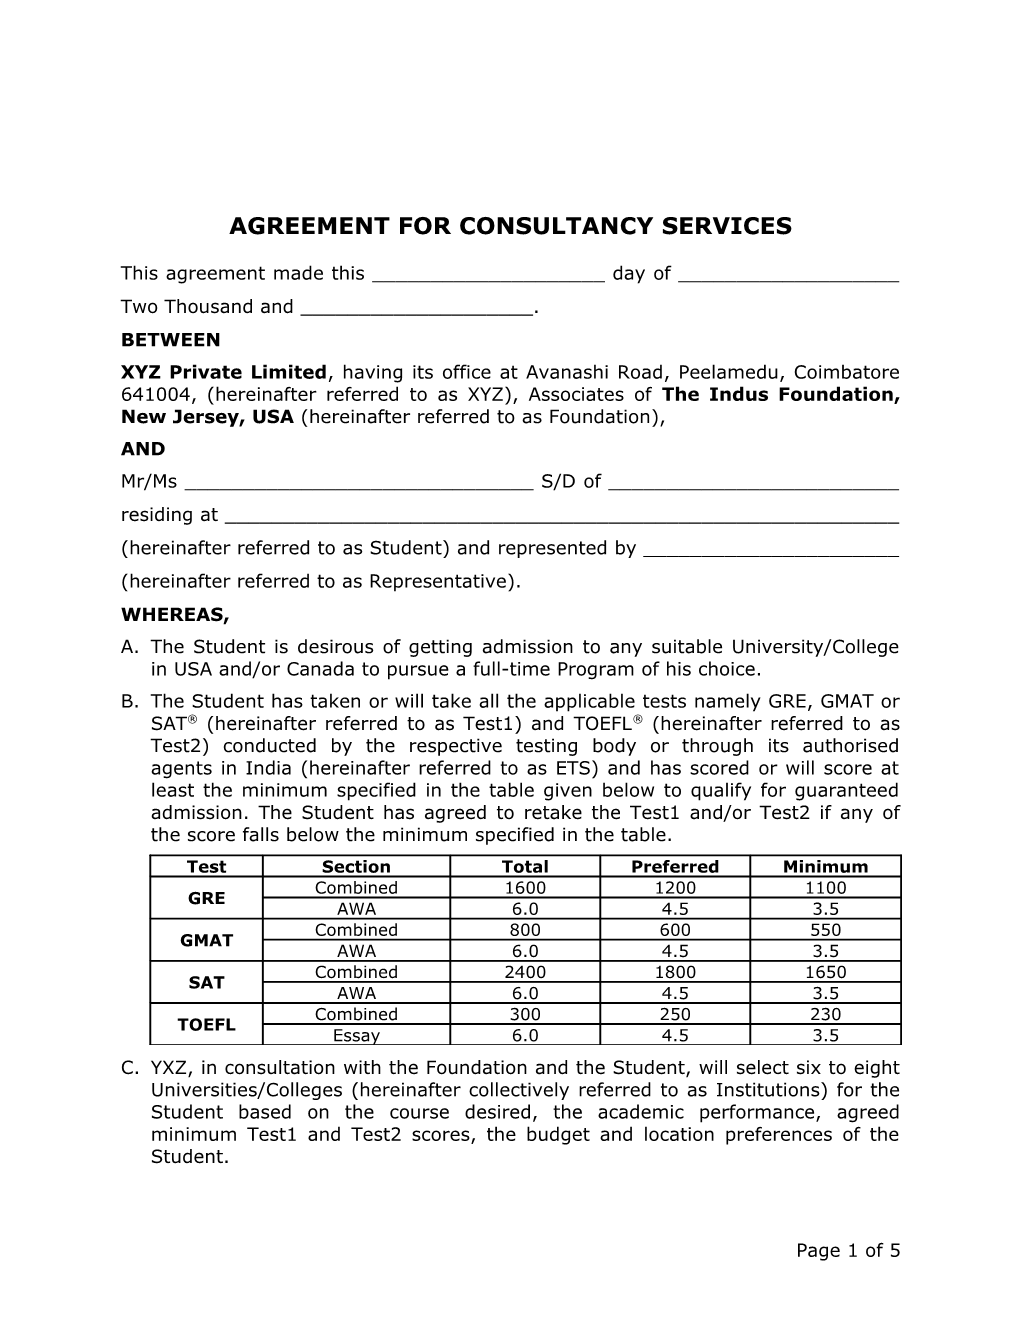 Agreement for Consultancy Services